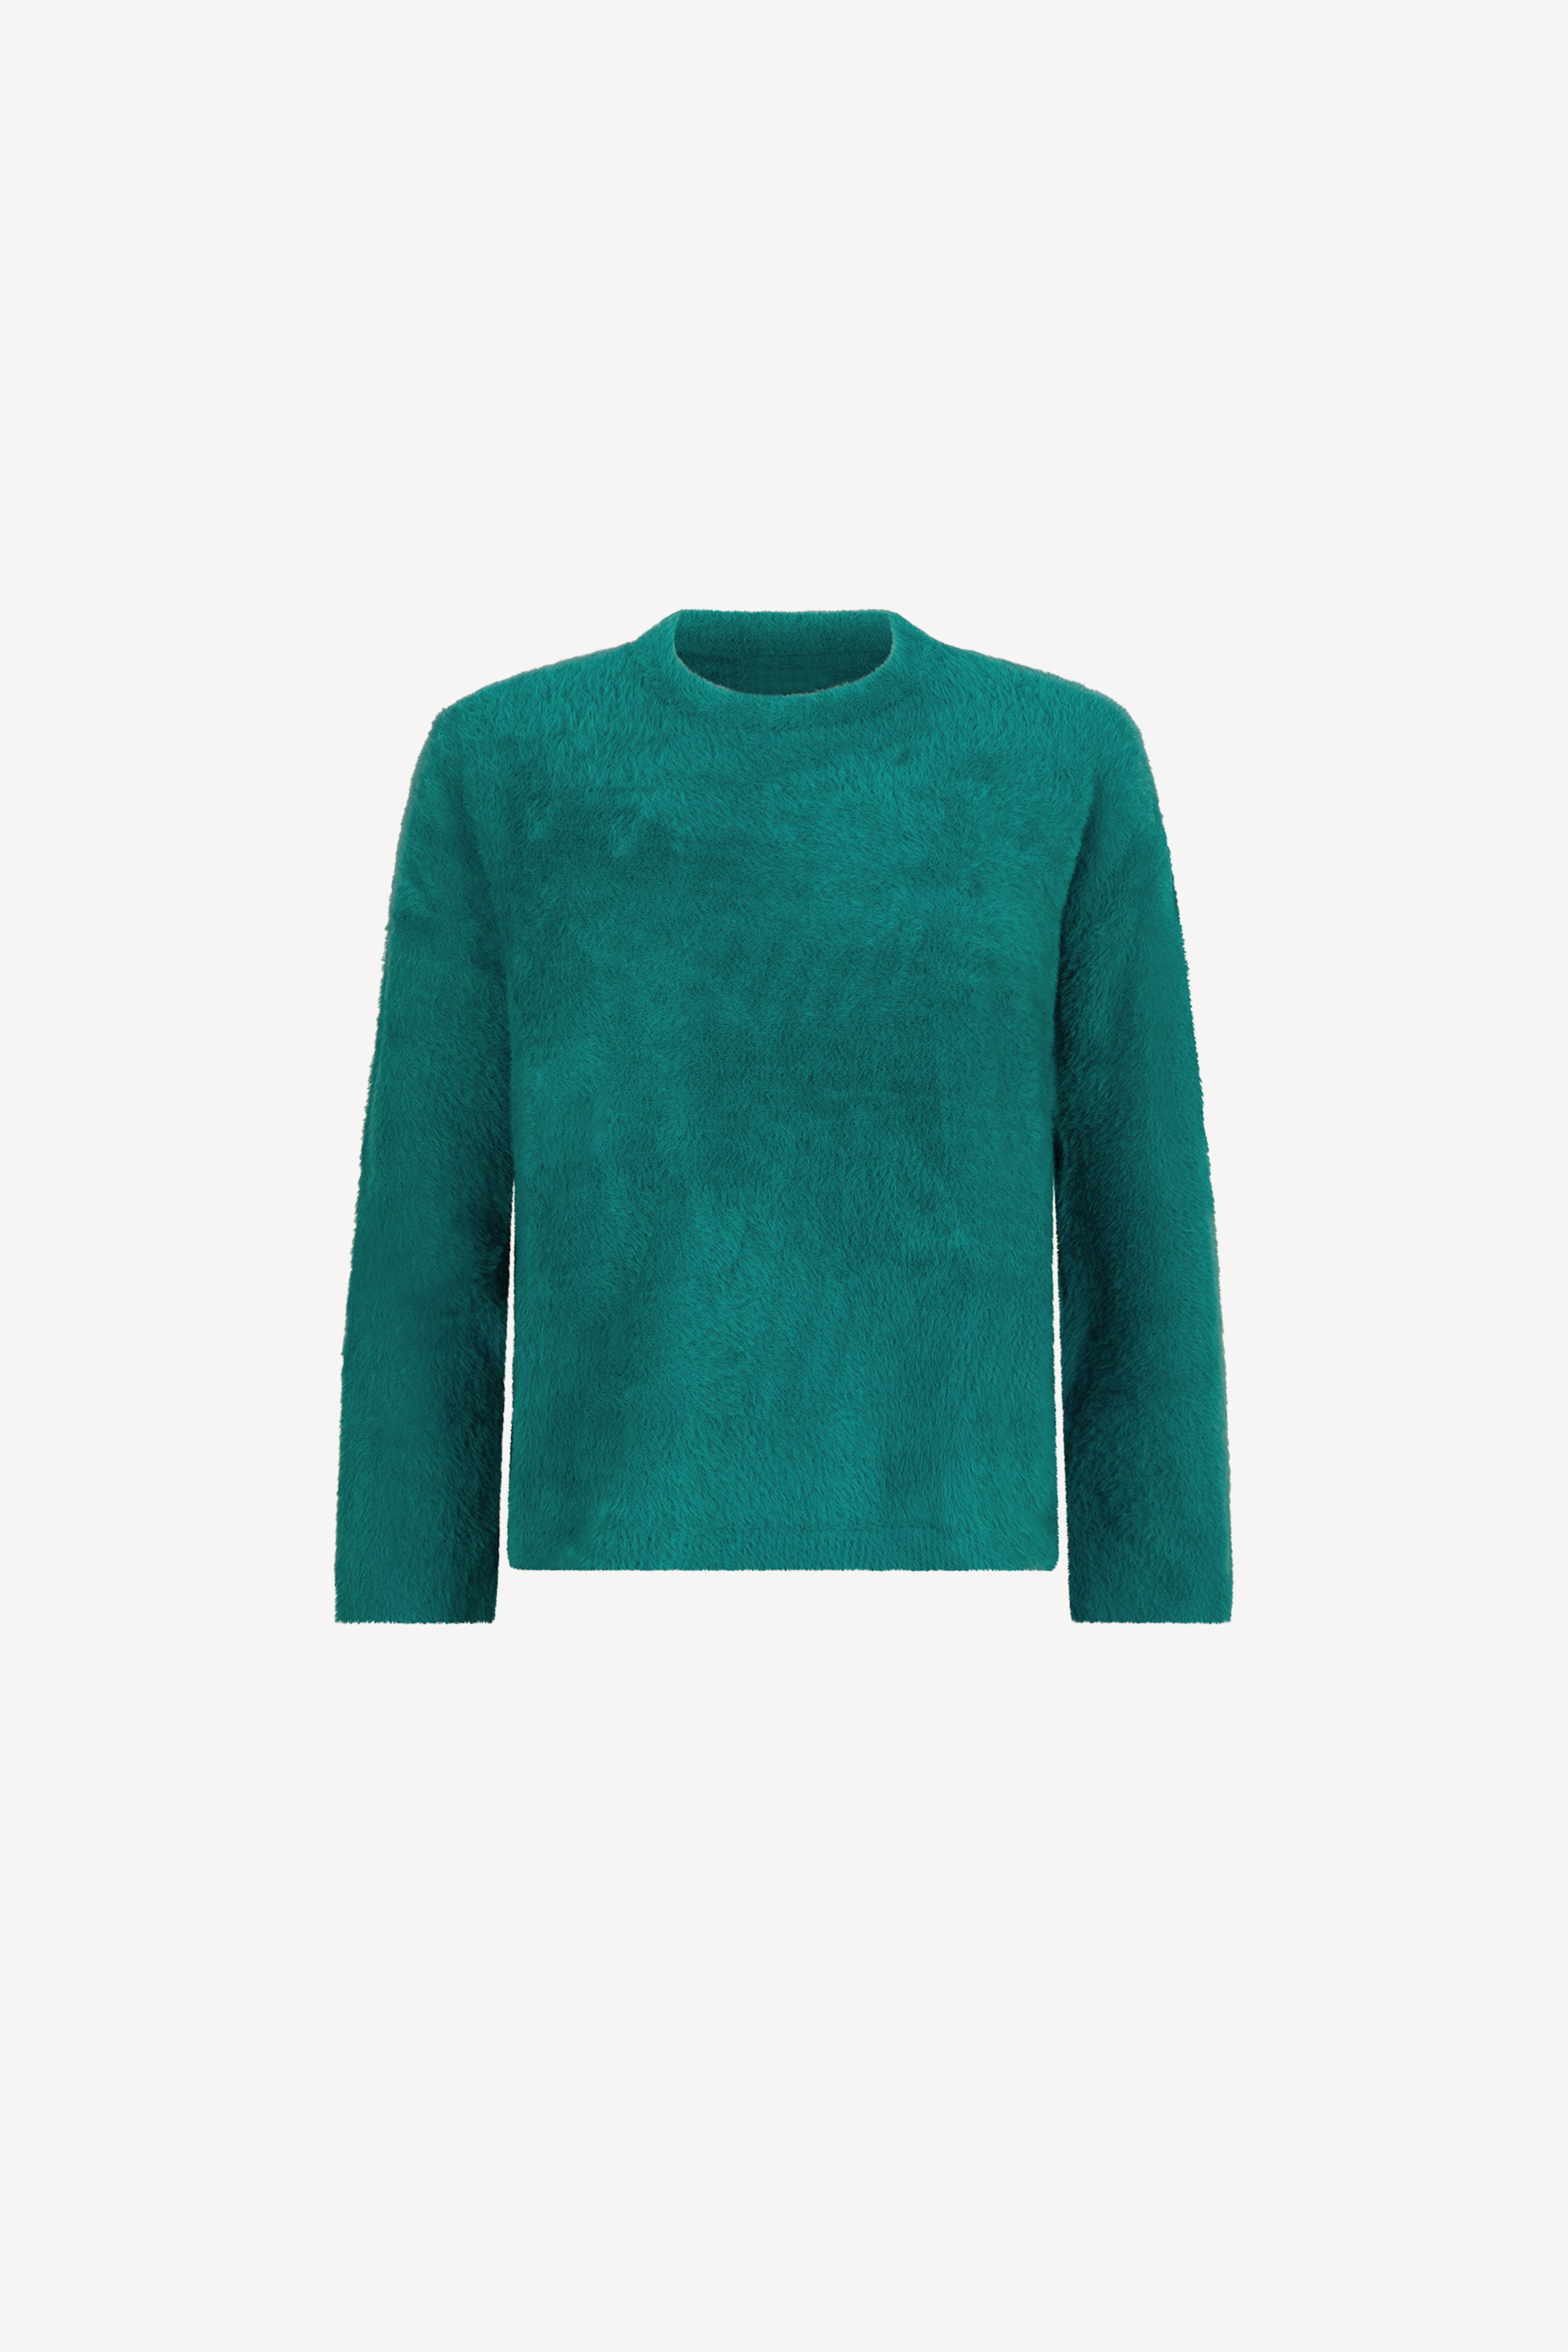 Olivia Knitted Sweater Emerald